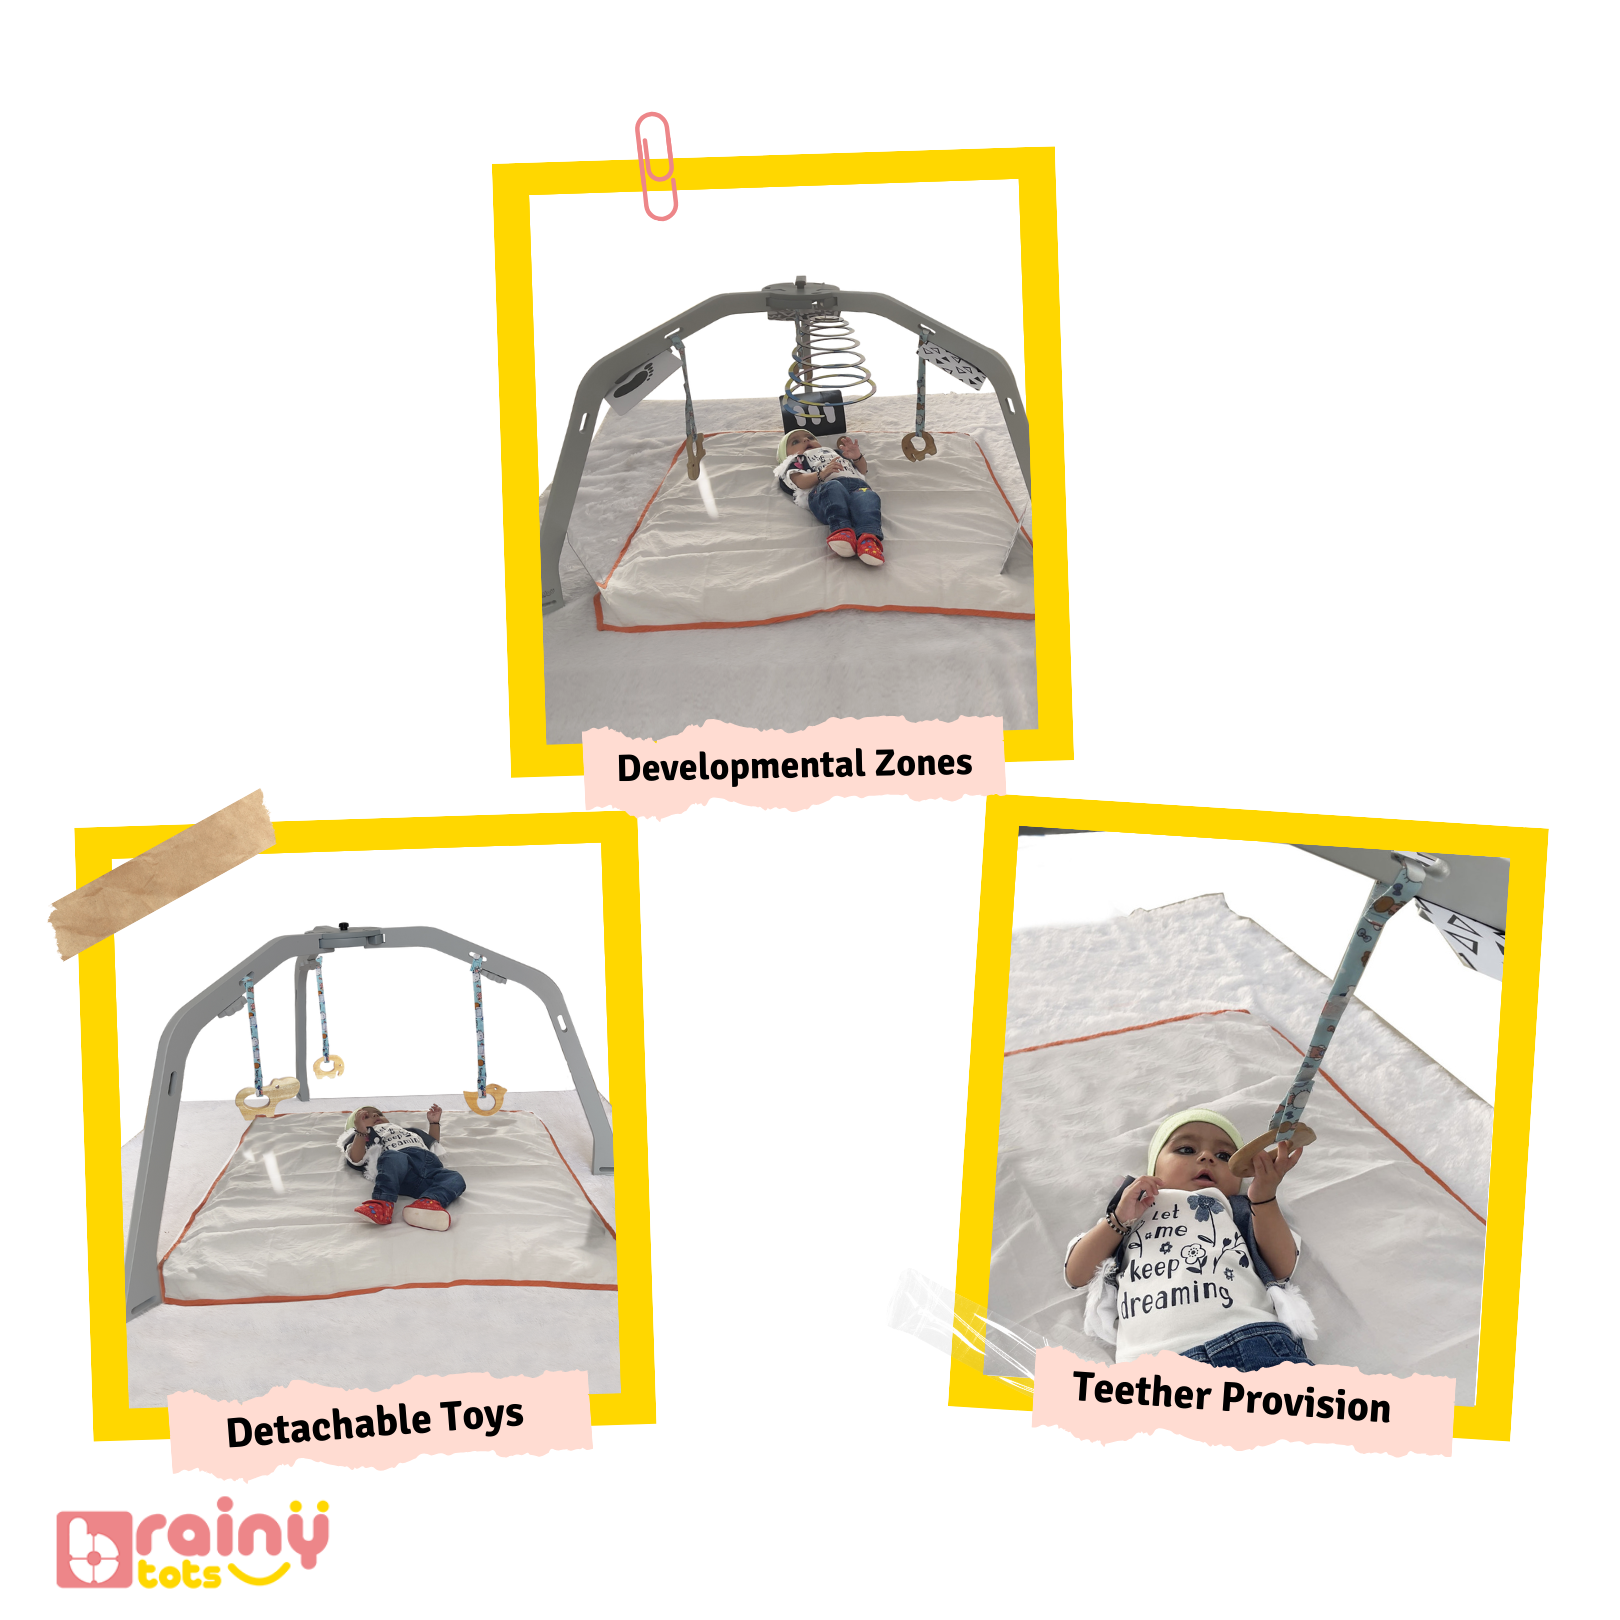 Features of our Wooden Play Gym, designed for infants aged 0-12 months. It includes varied textures, a baby-safe mirror, high-contrast elements, and a spiral hanging mobile. This Montessori toy promotes sensory development, motor skills, and visual exploration. Safe, sturdy, and perfect for early learning and interactive play.